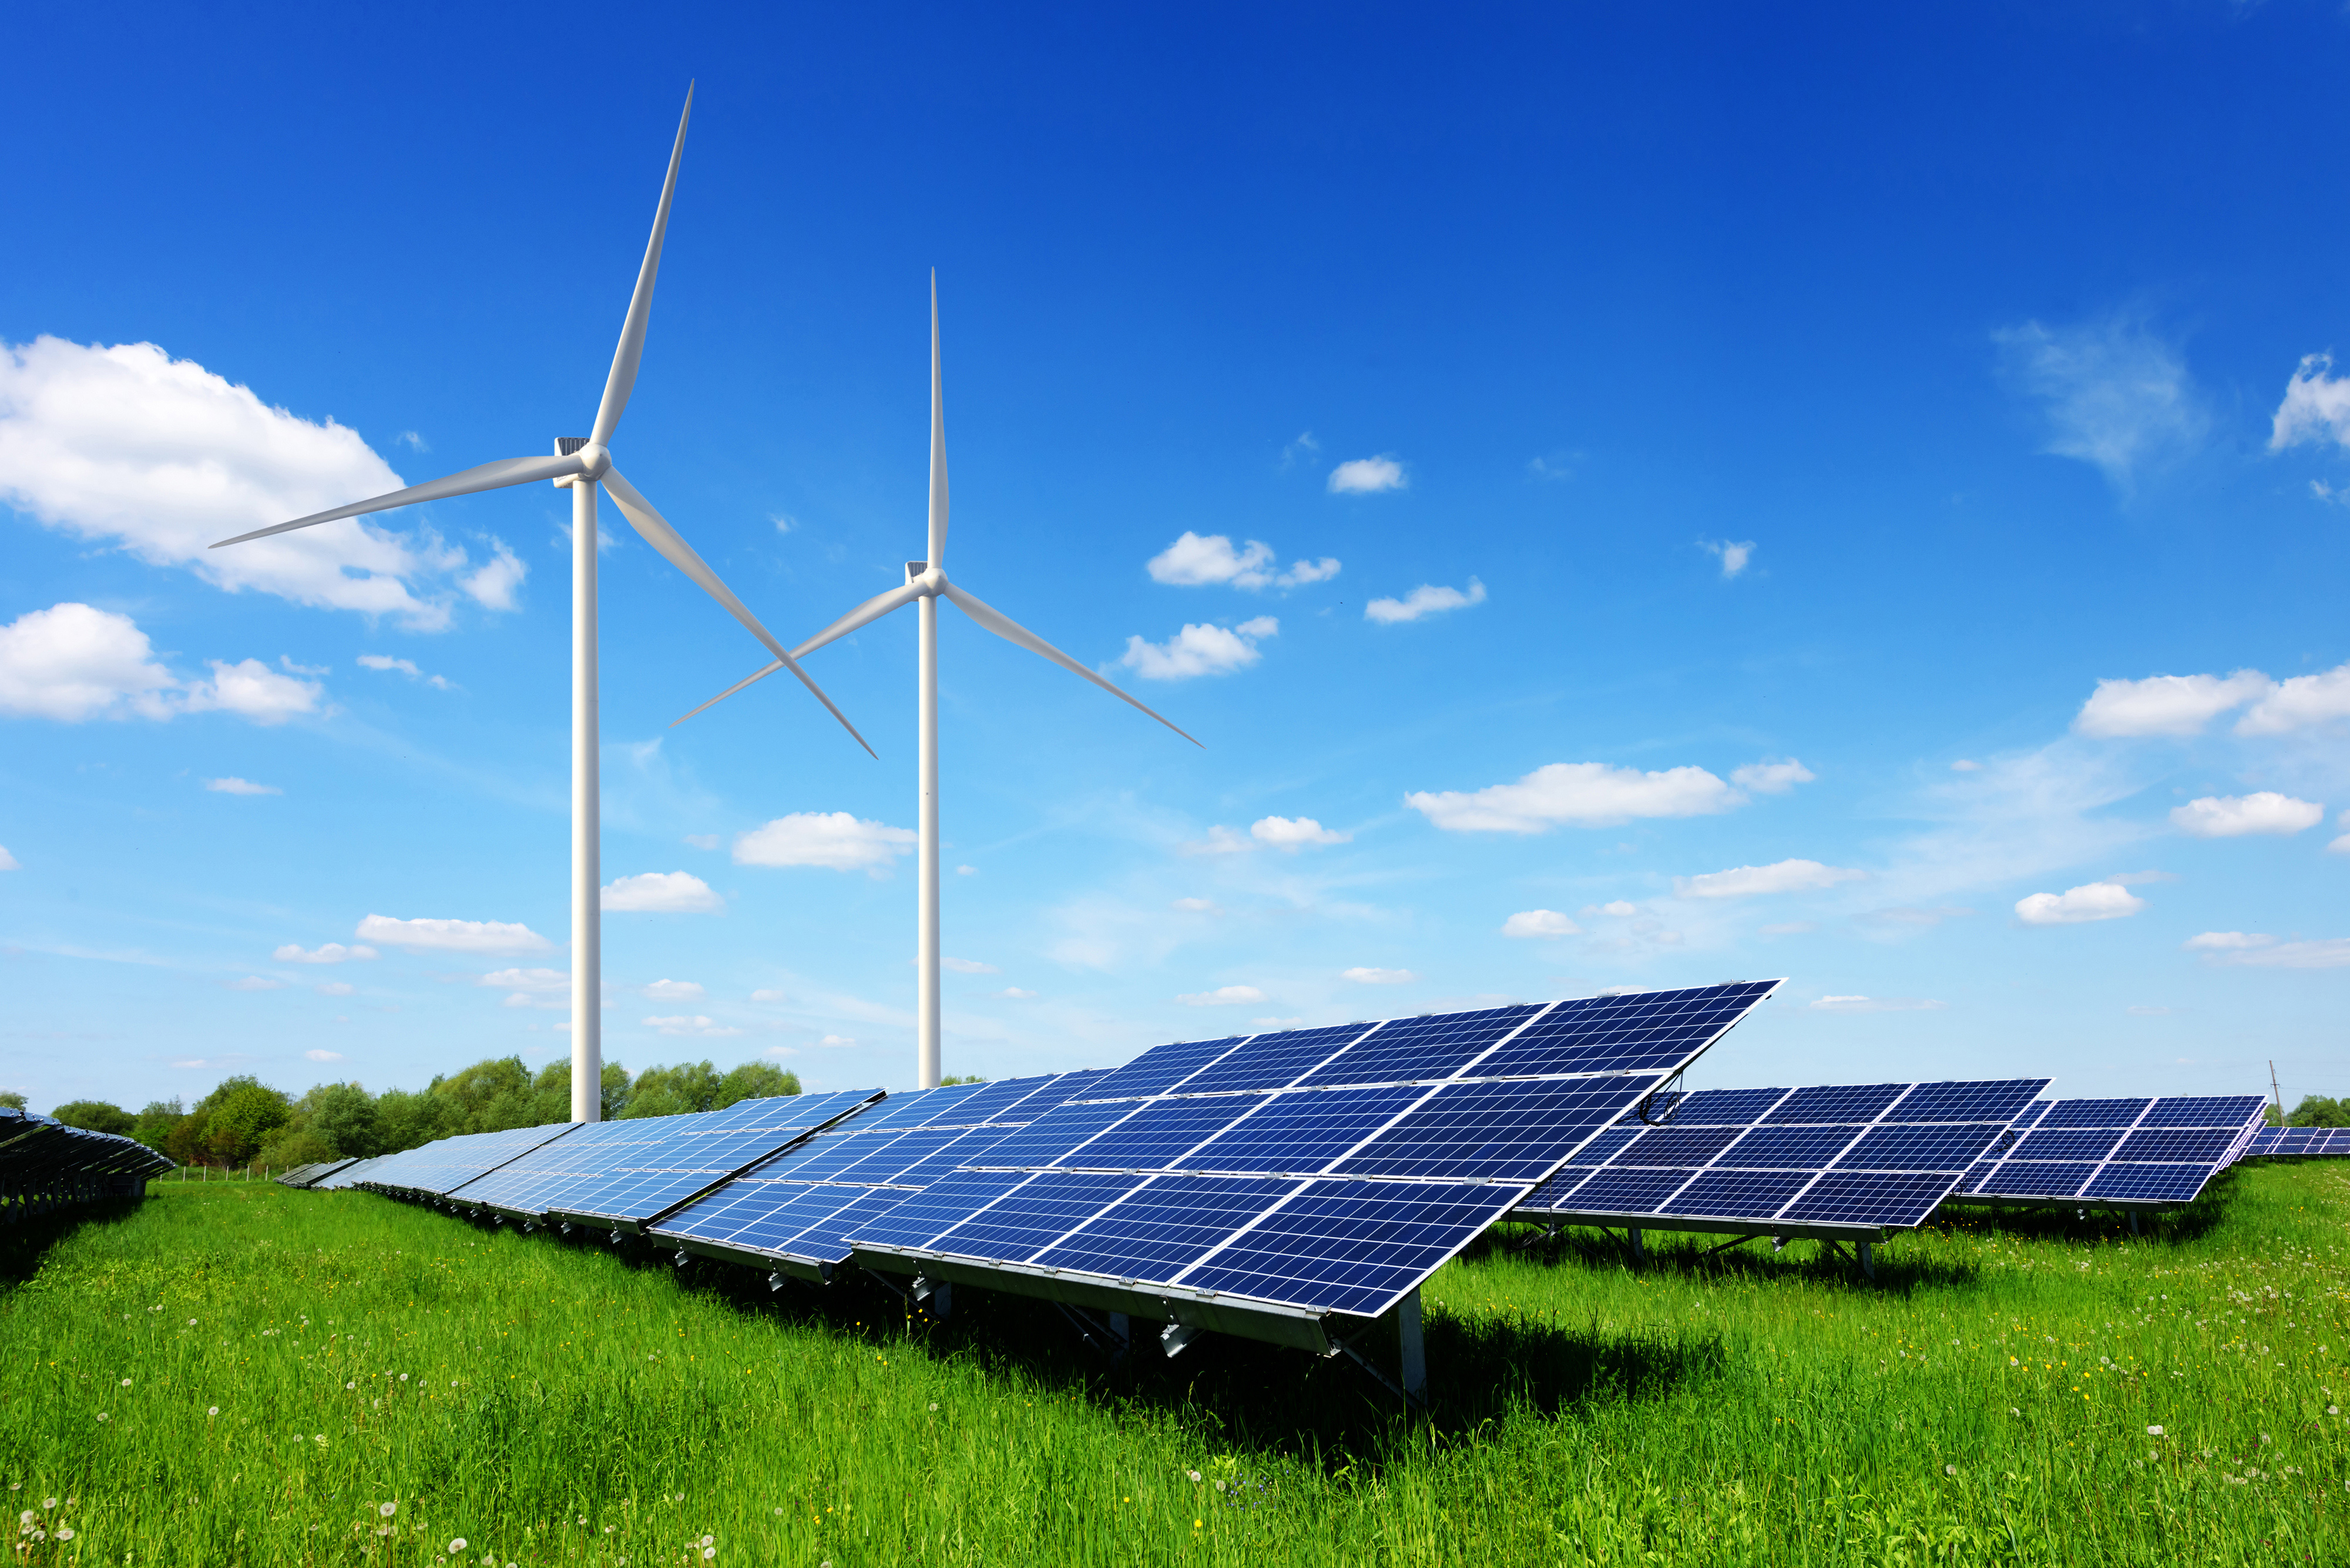 Solar panel and wind turbines on green grass with blue sky background.